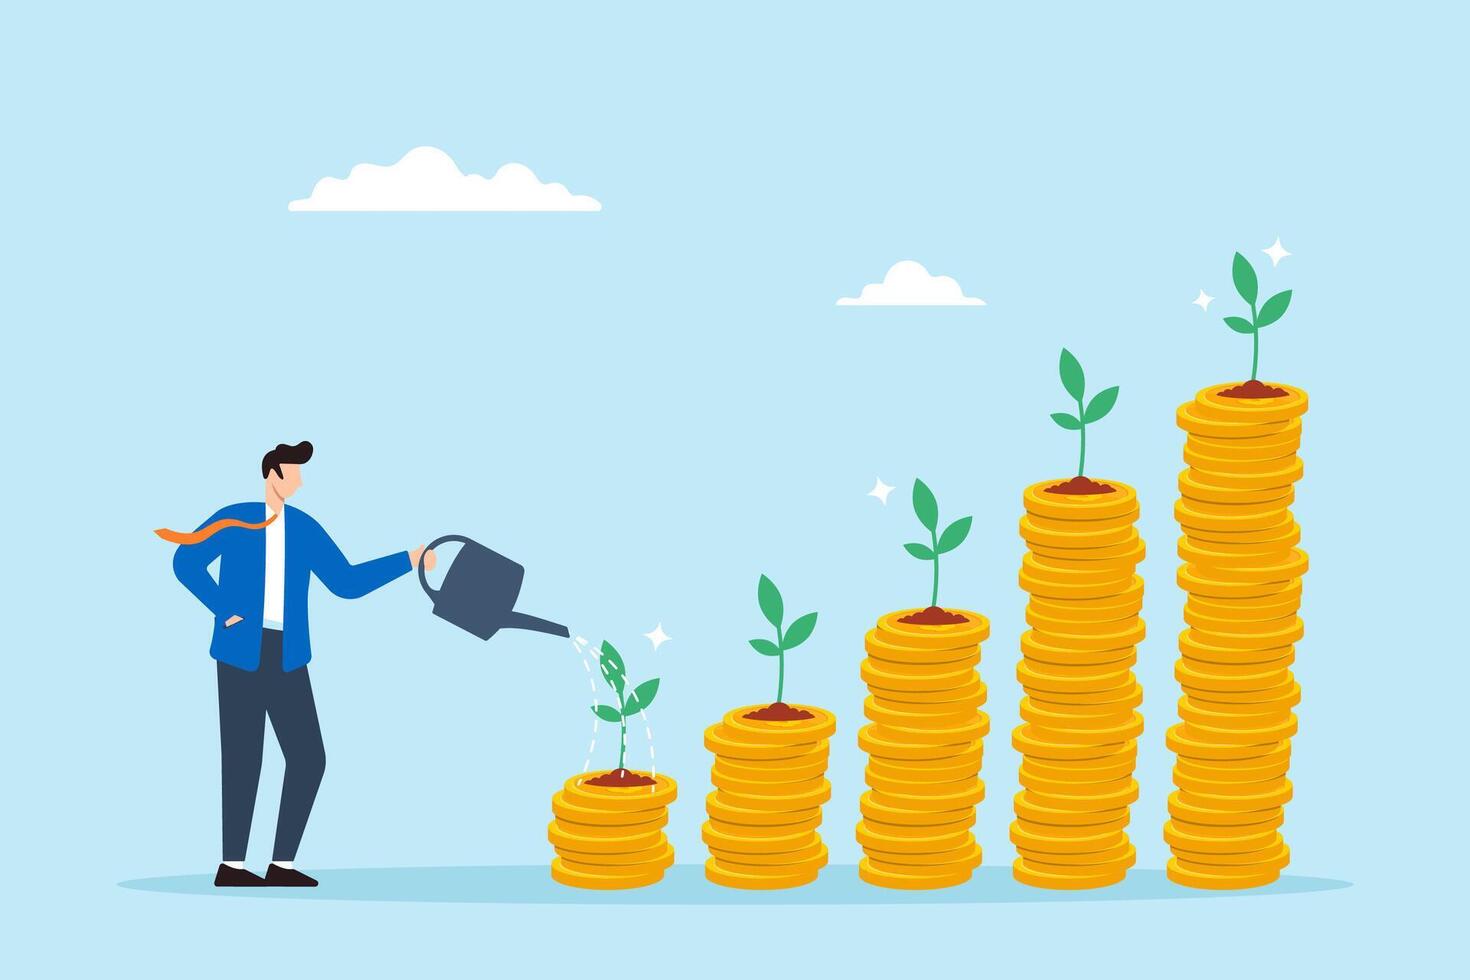 Businessman watering young plants growing on stack of coins. Concept of investments or savings to grow and earn profits, mutual funds, wealth accumulation, and pension funds vector